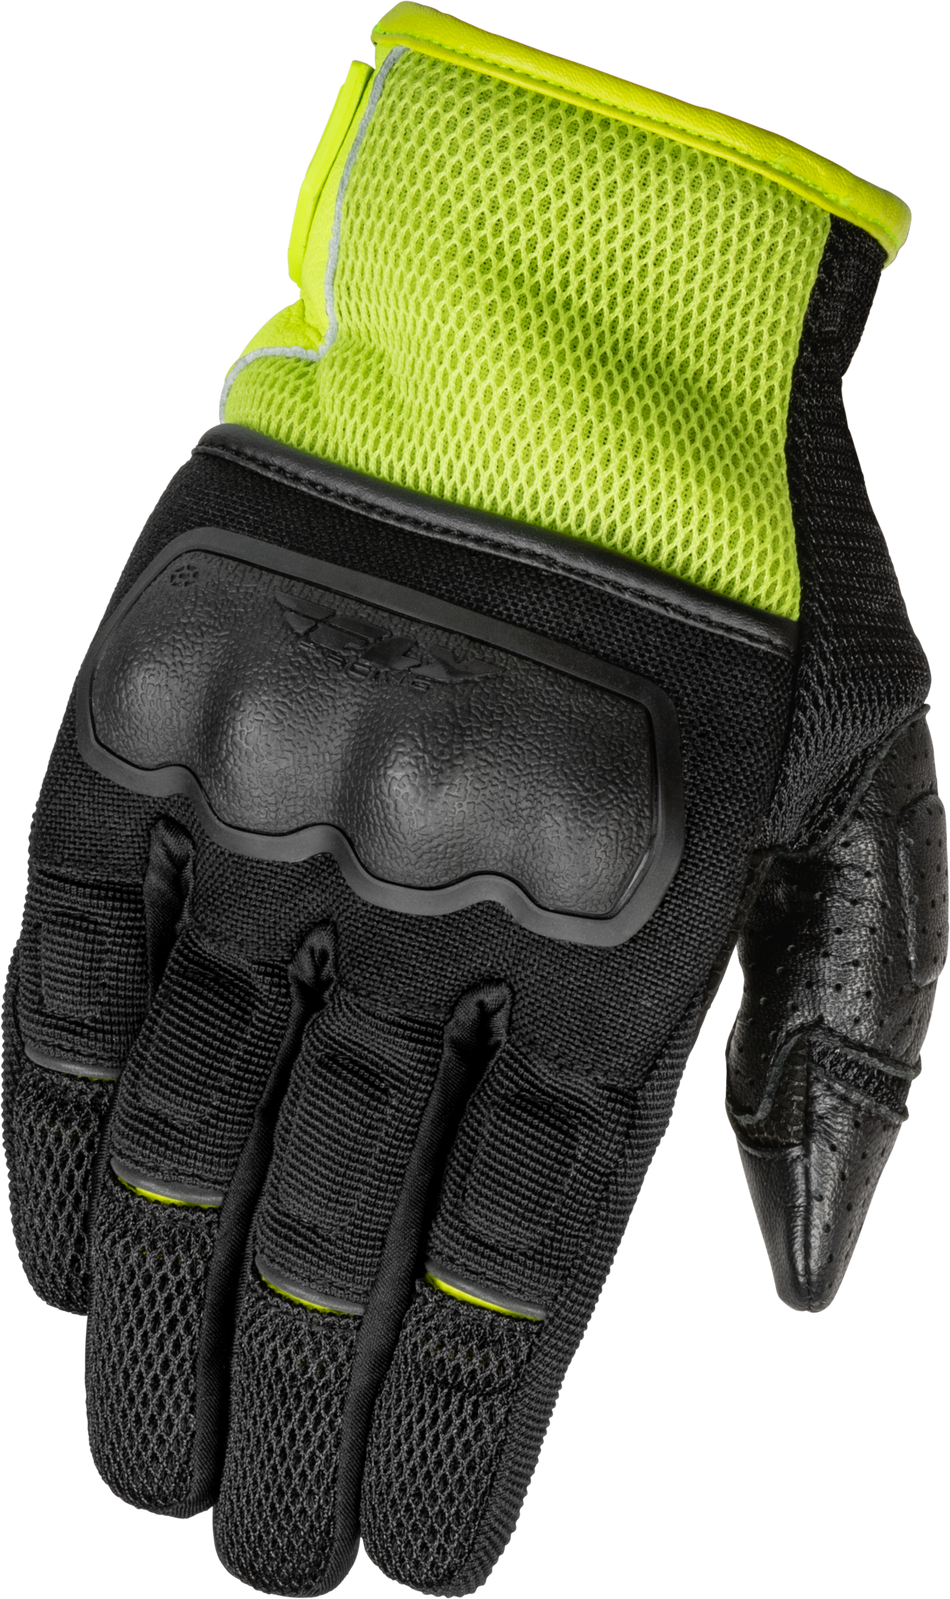 FLY RACING Coolpro Force Gloves Black/Hi-Vis 2x 476-41282X